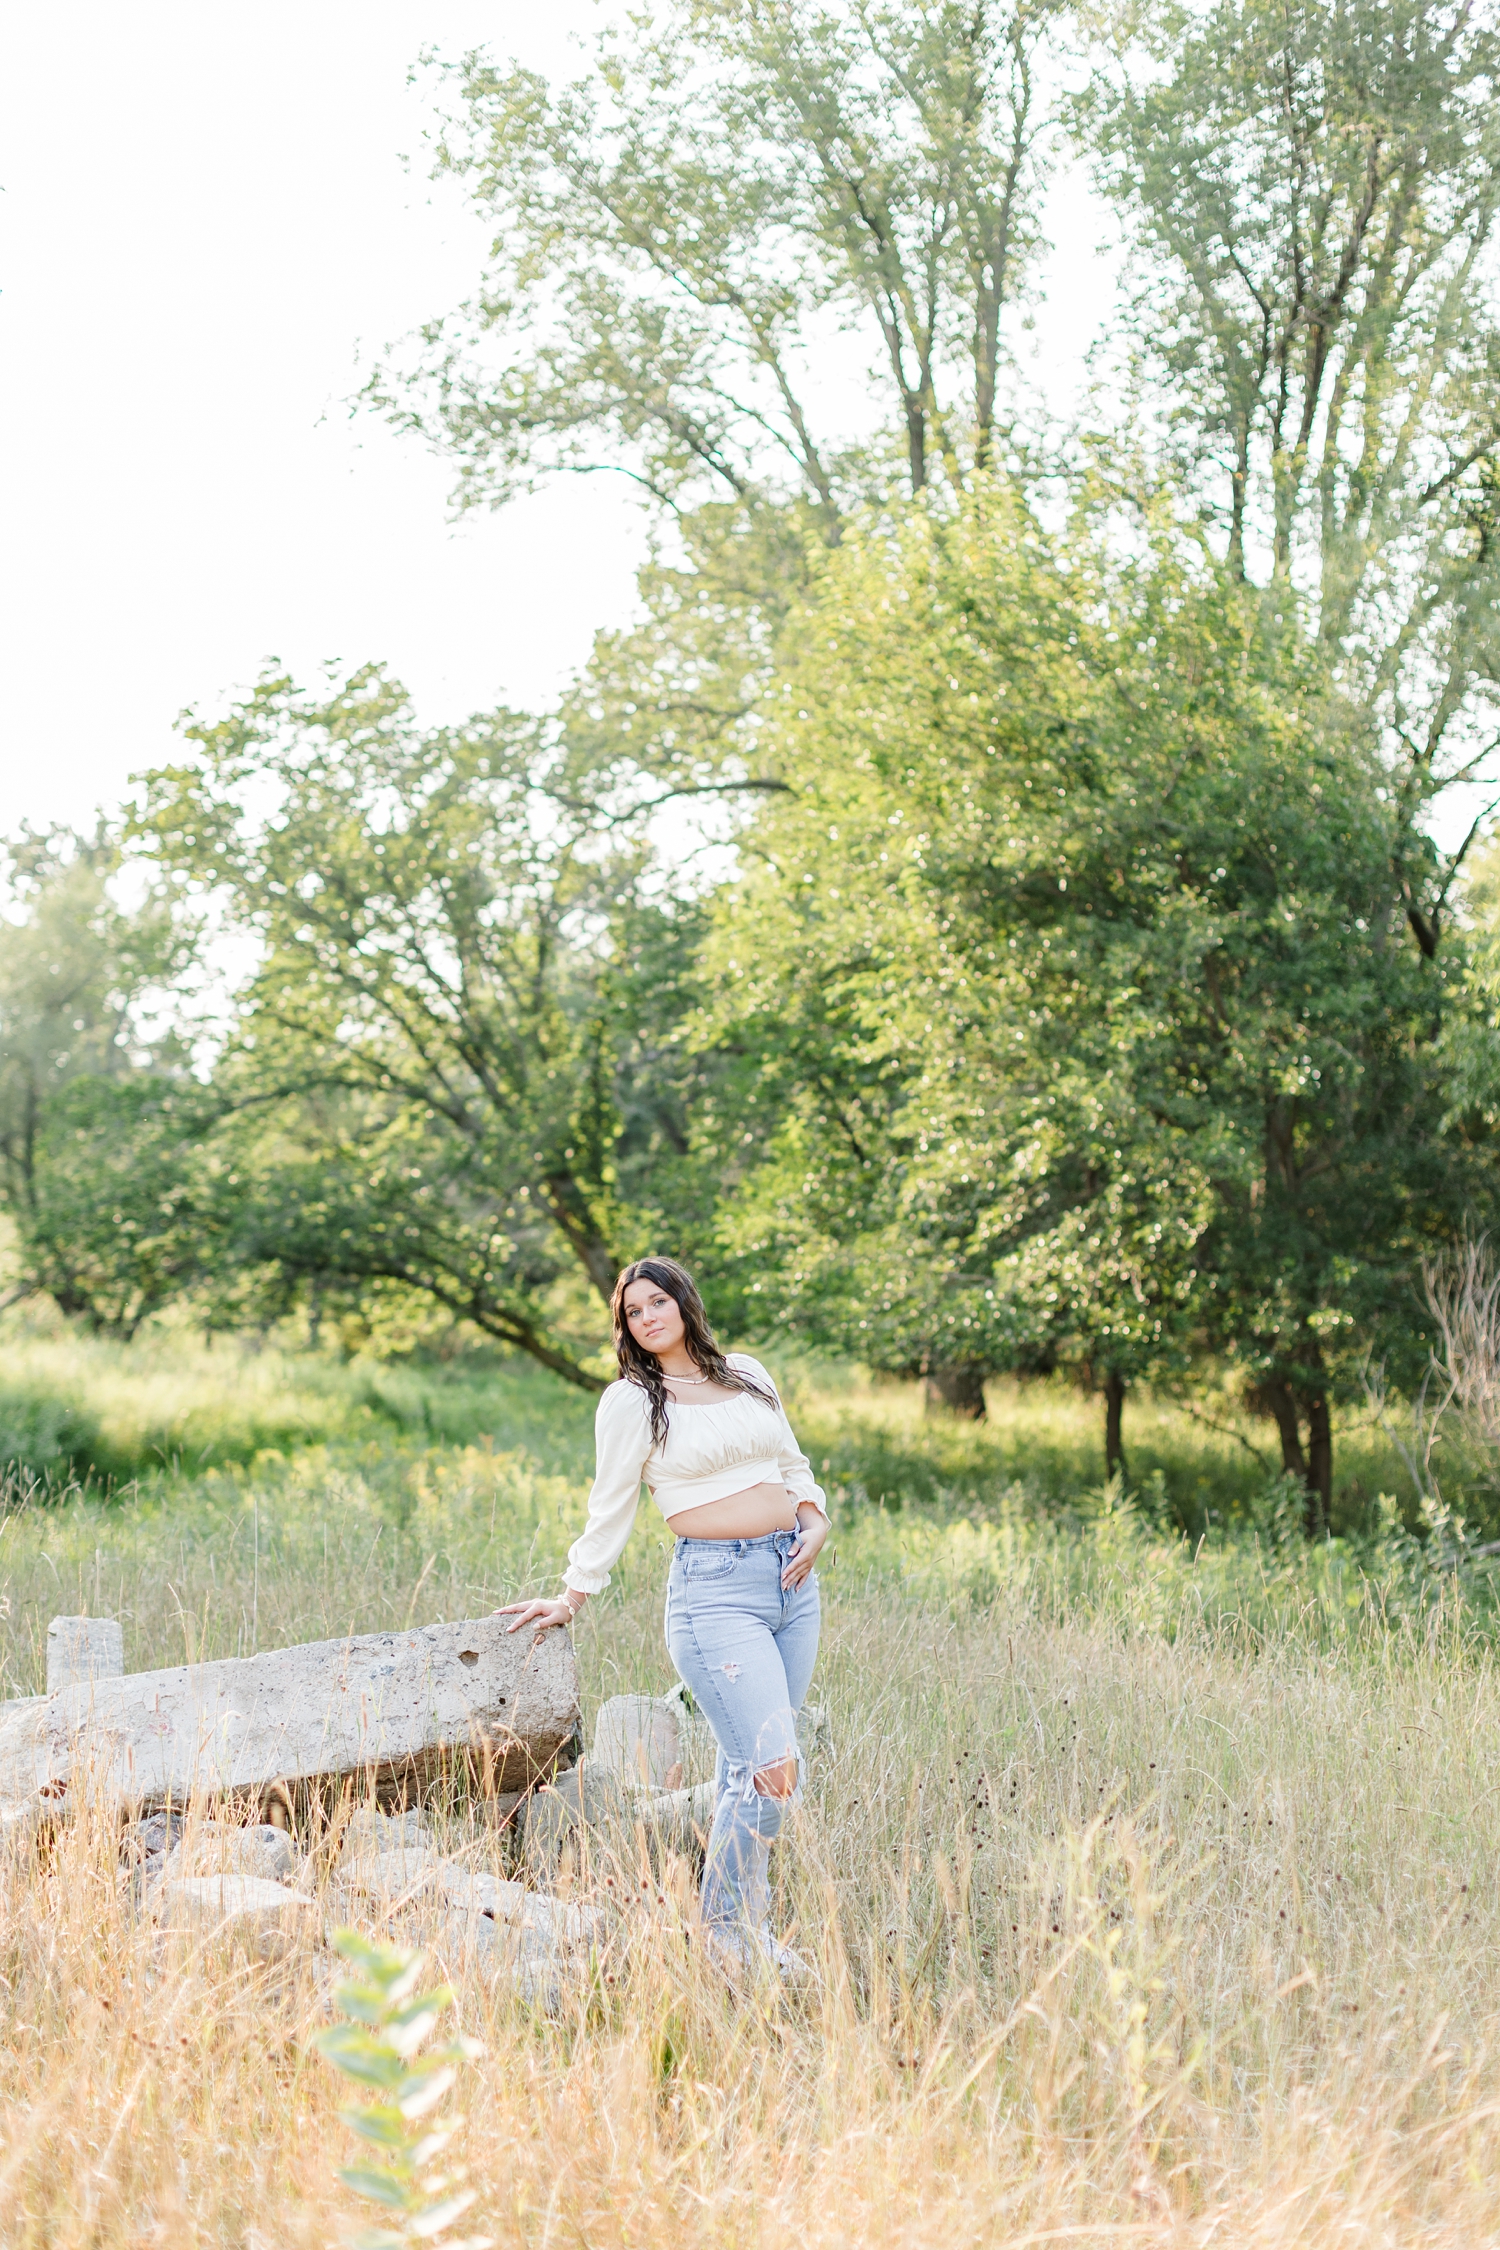 Lily leans against large stones in the middle of a grassy field | CB Studio